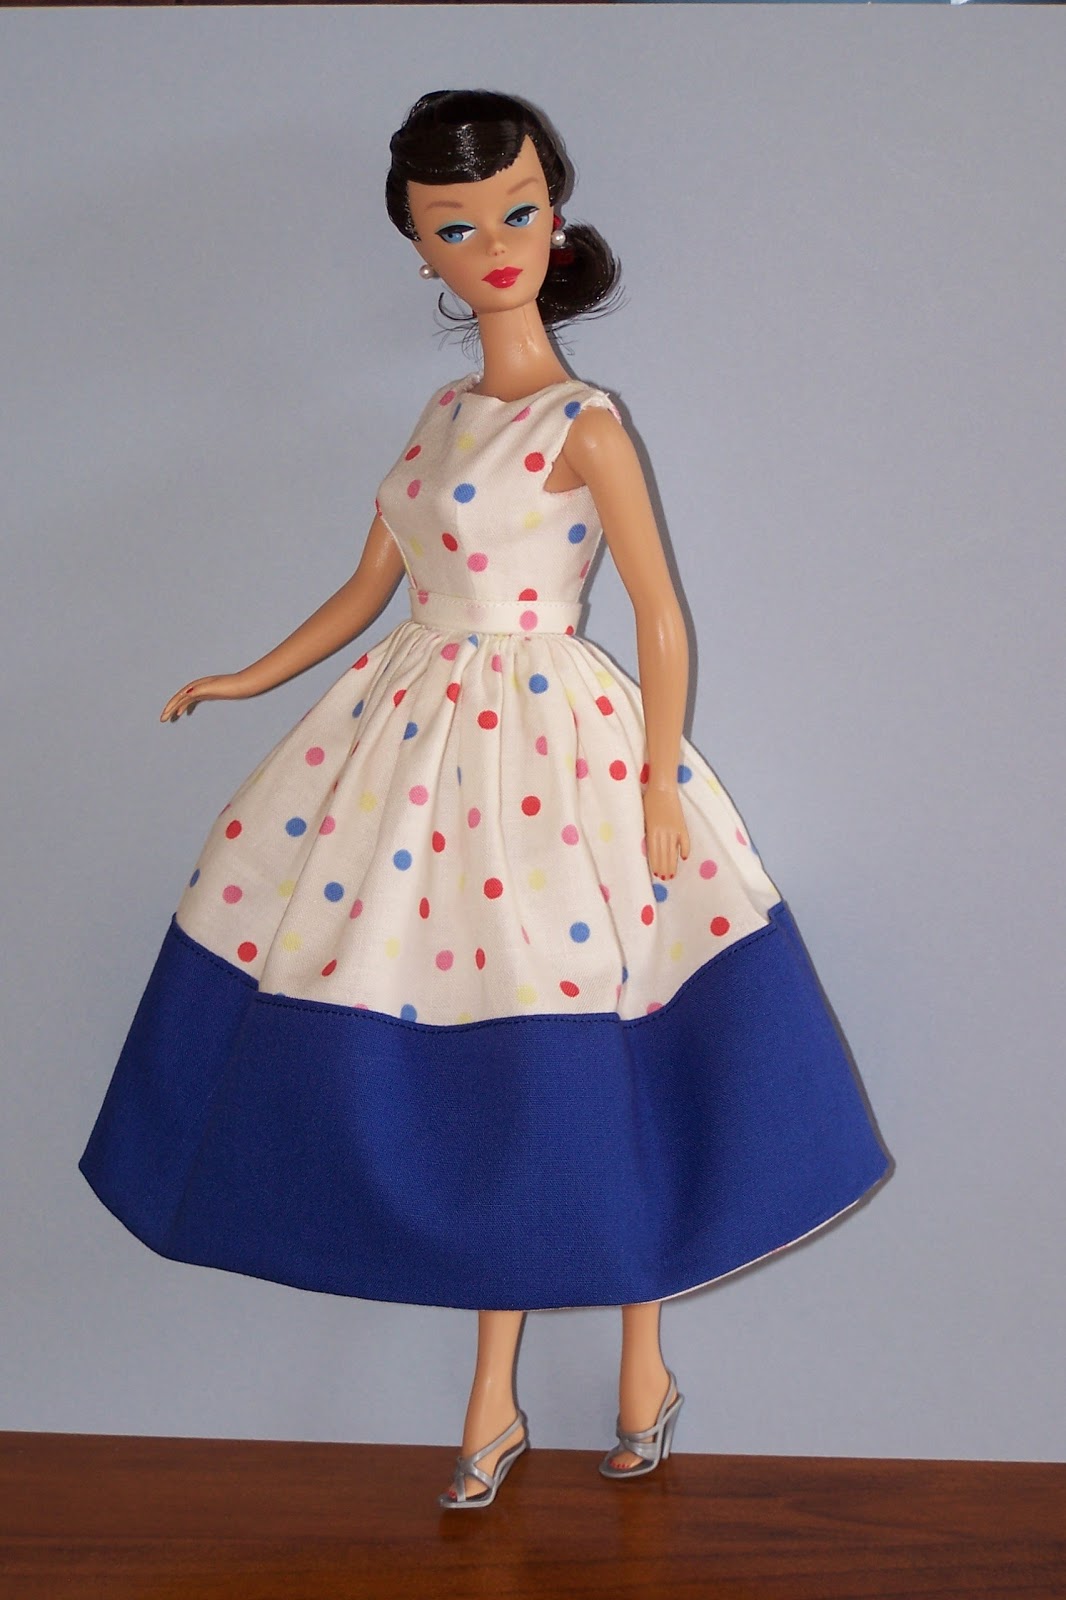 Lizzie's Arty Crafty 'n Dolls: Dolls! Reproduction Ponytail Barbie Gets